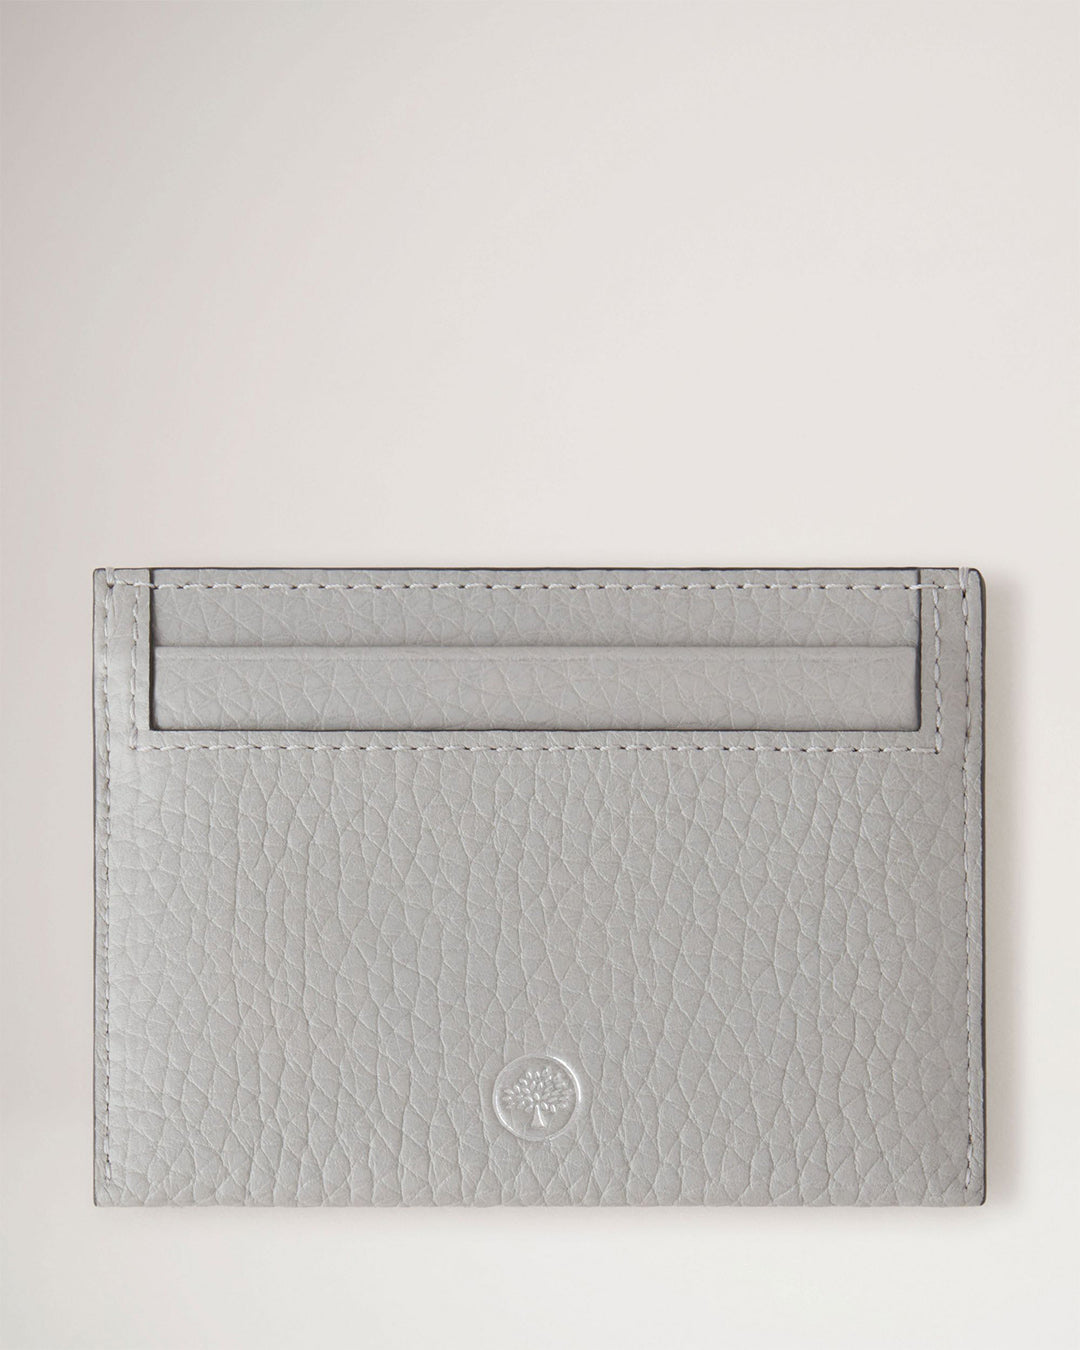 Mulberry Continental Credit Card Slip